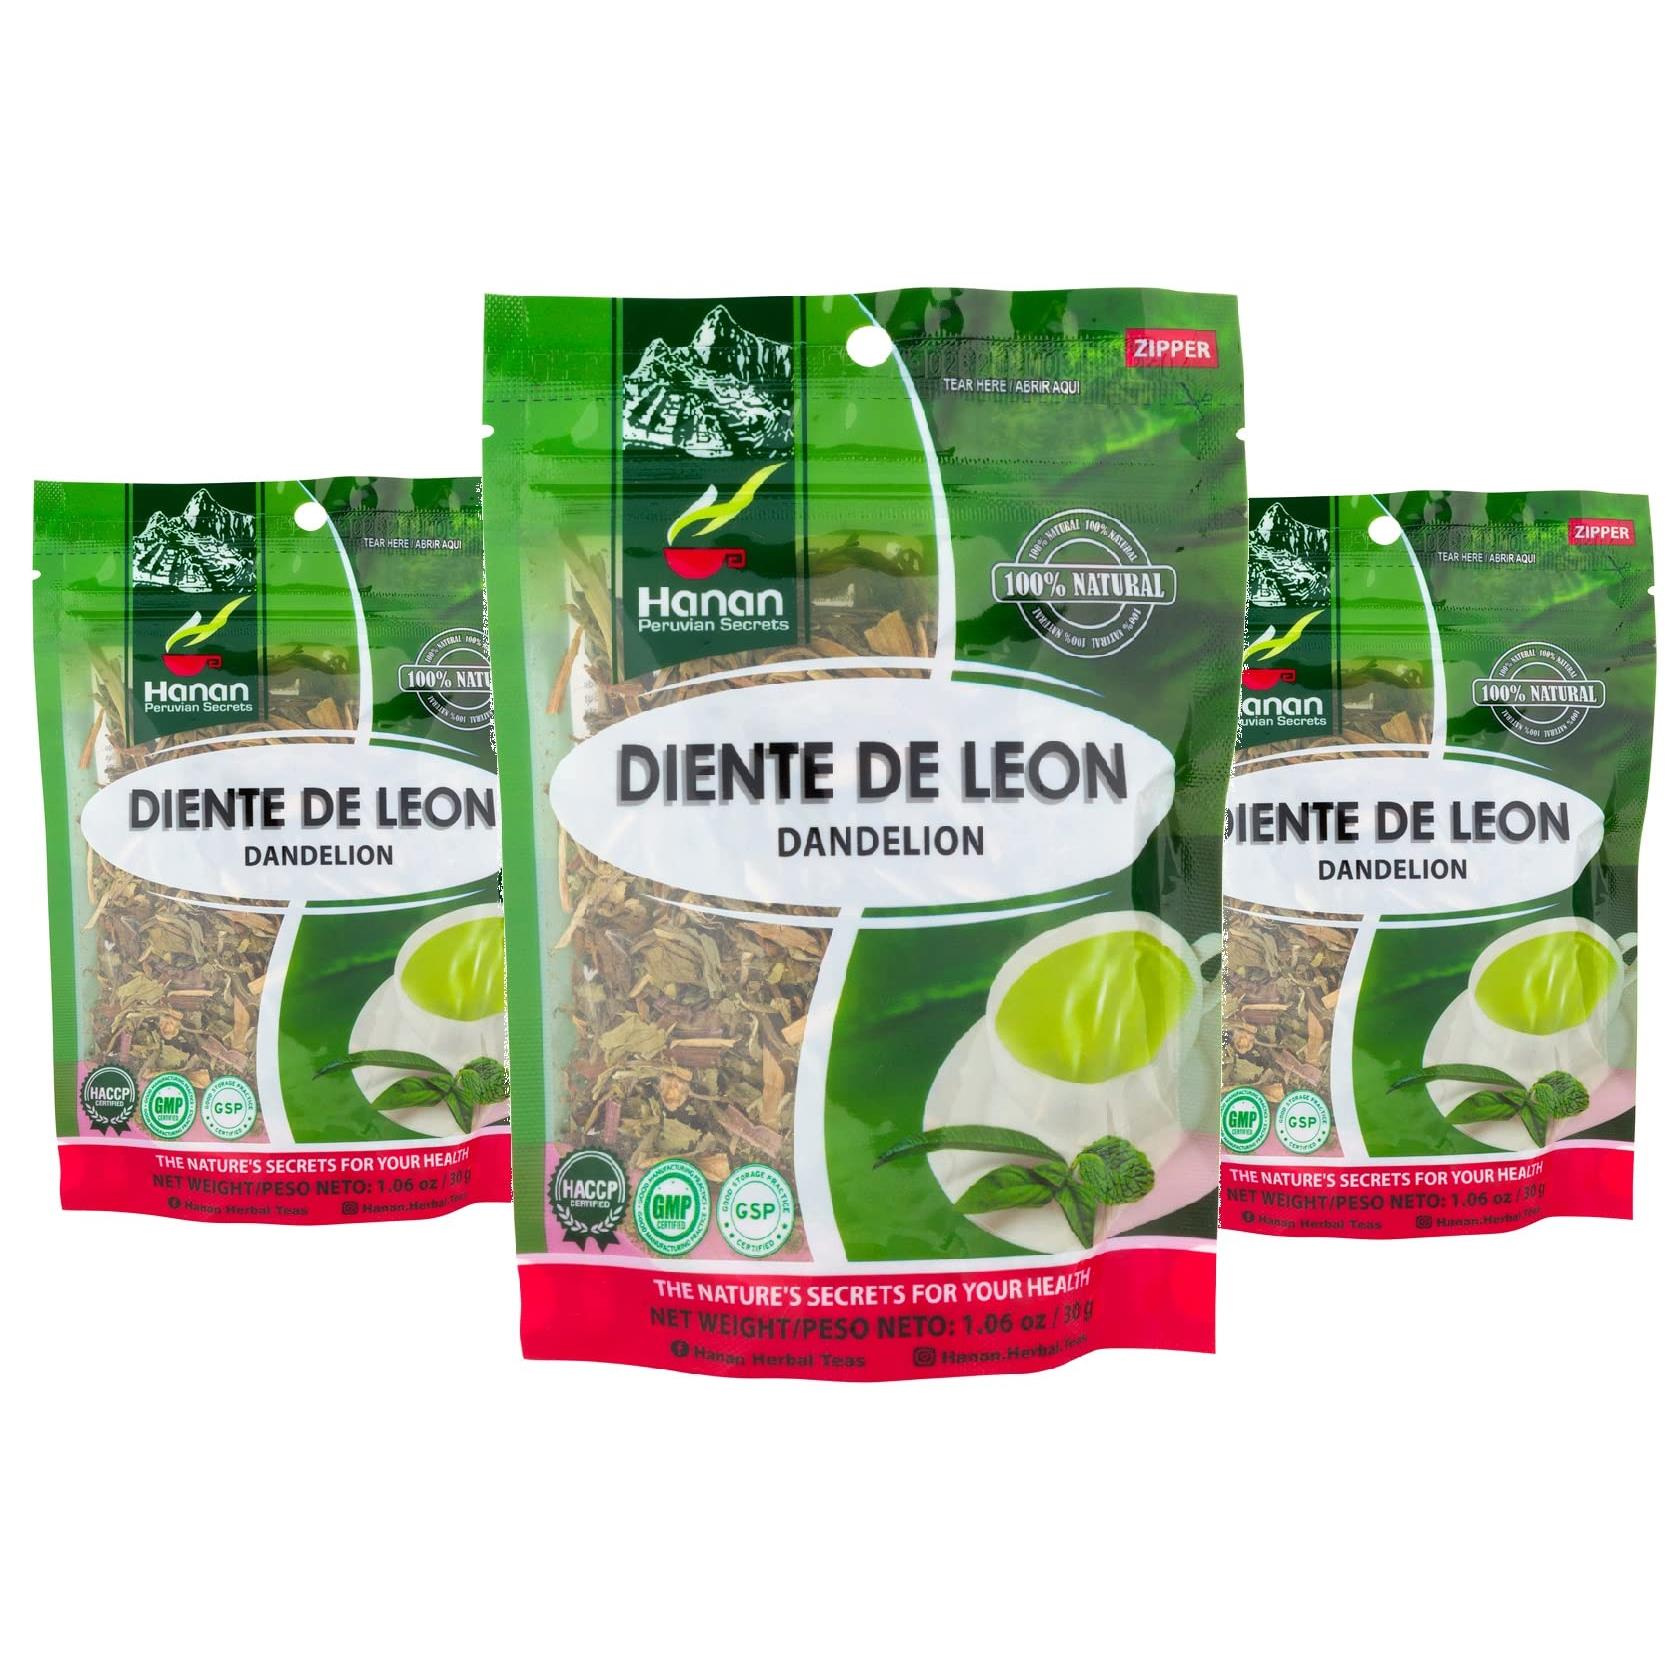 Hanan Dandelion Loose Herb Tea 3.2oz (90g Diente de Leon) - Pack of 3 Pouches with 30 Grams Each of All-Natural Dandelion Root Flower Plant Leaves from Peru